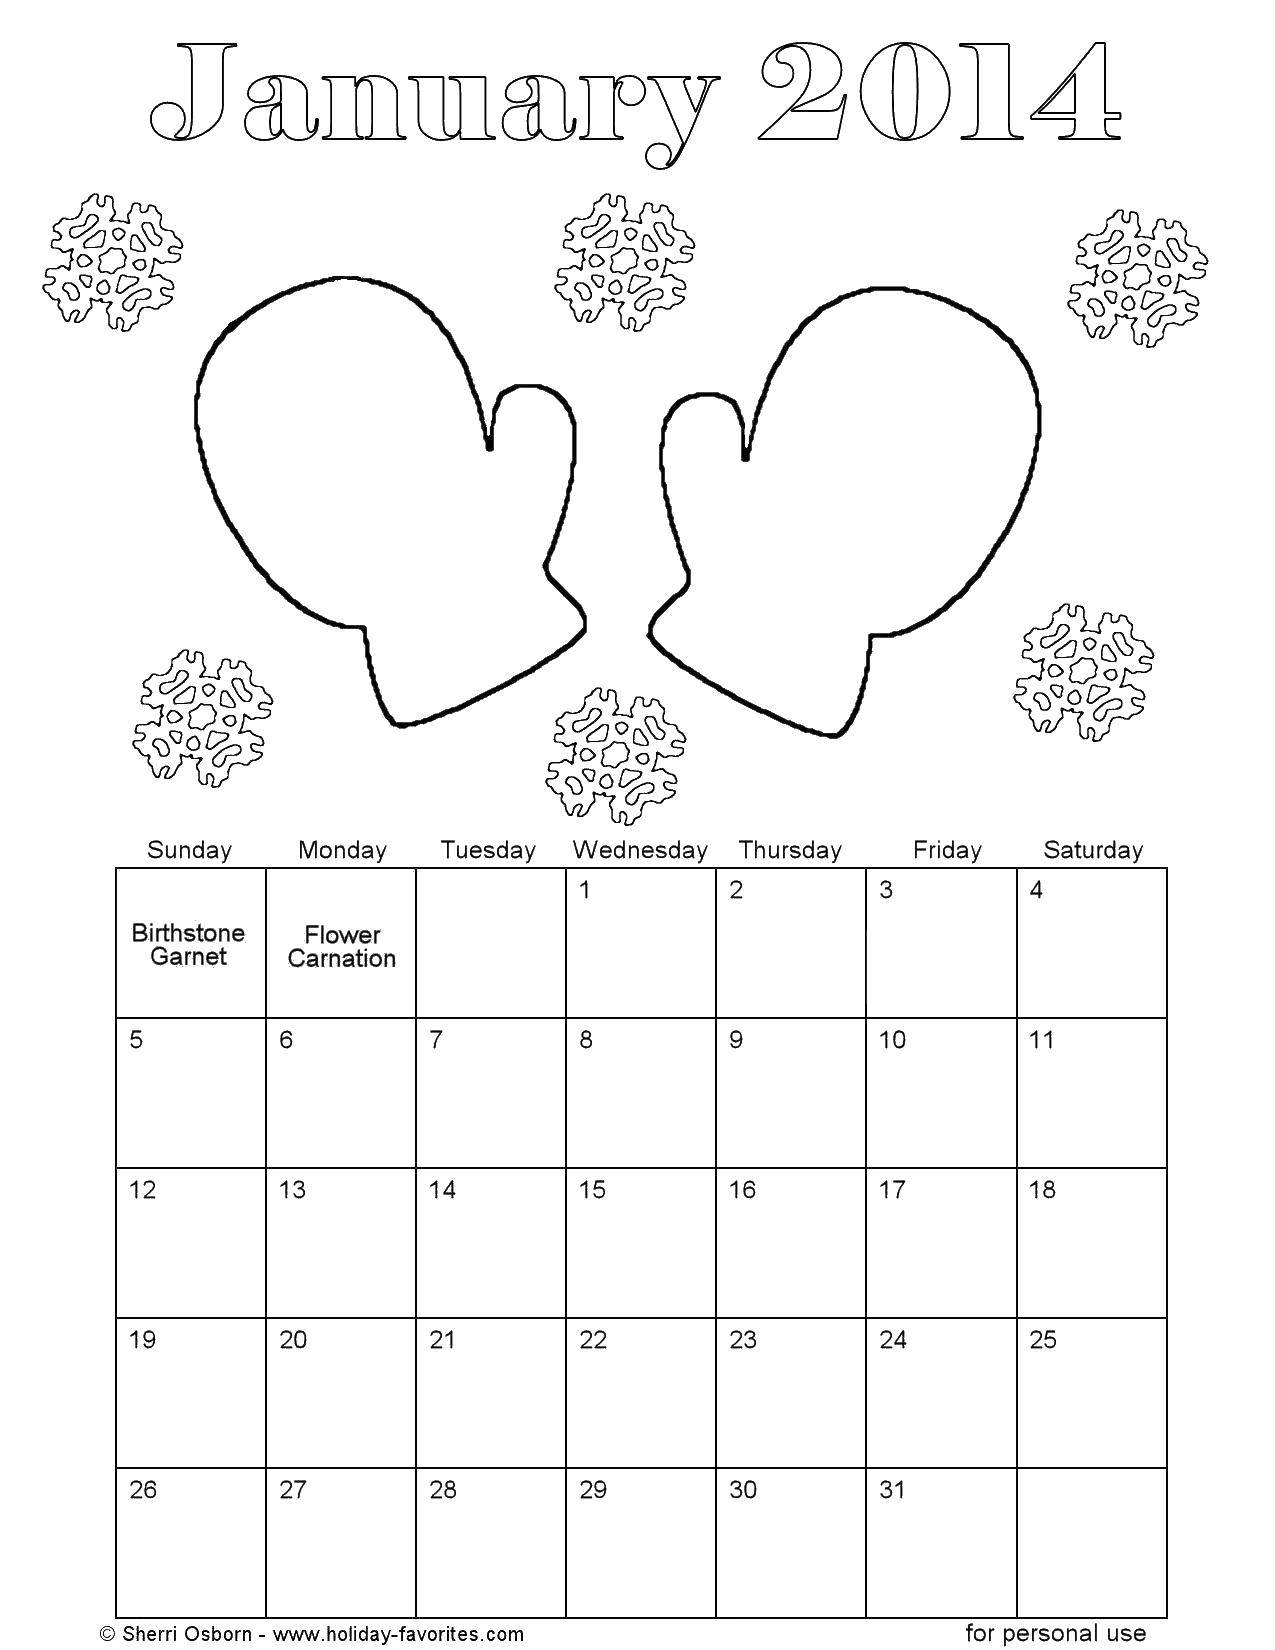 Coloring January 2014. Category Calendar. Tags:  January, mittens.